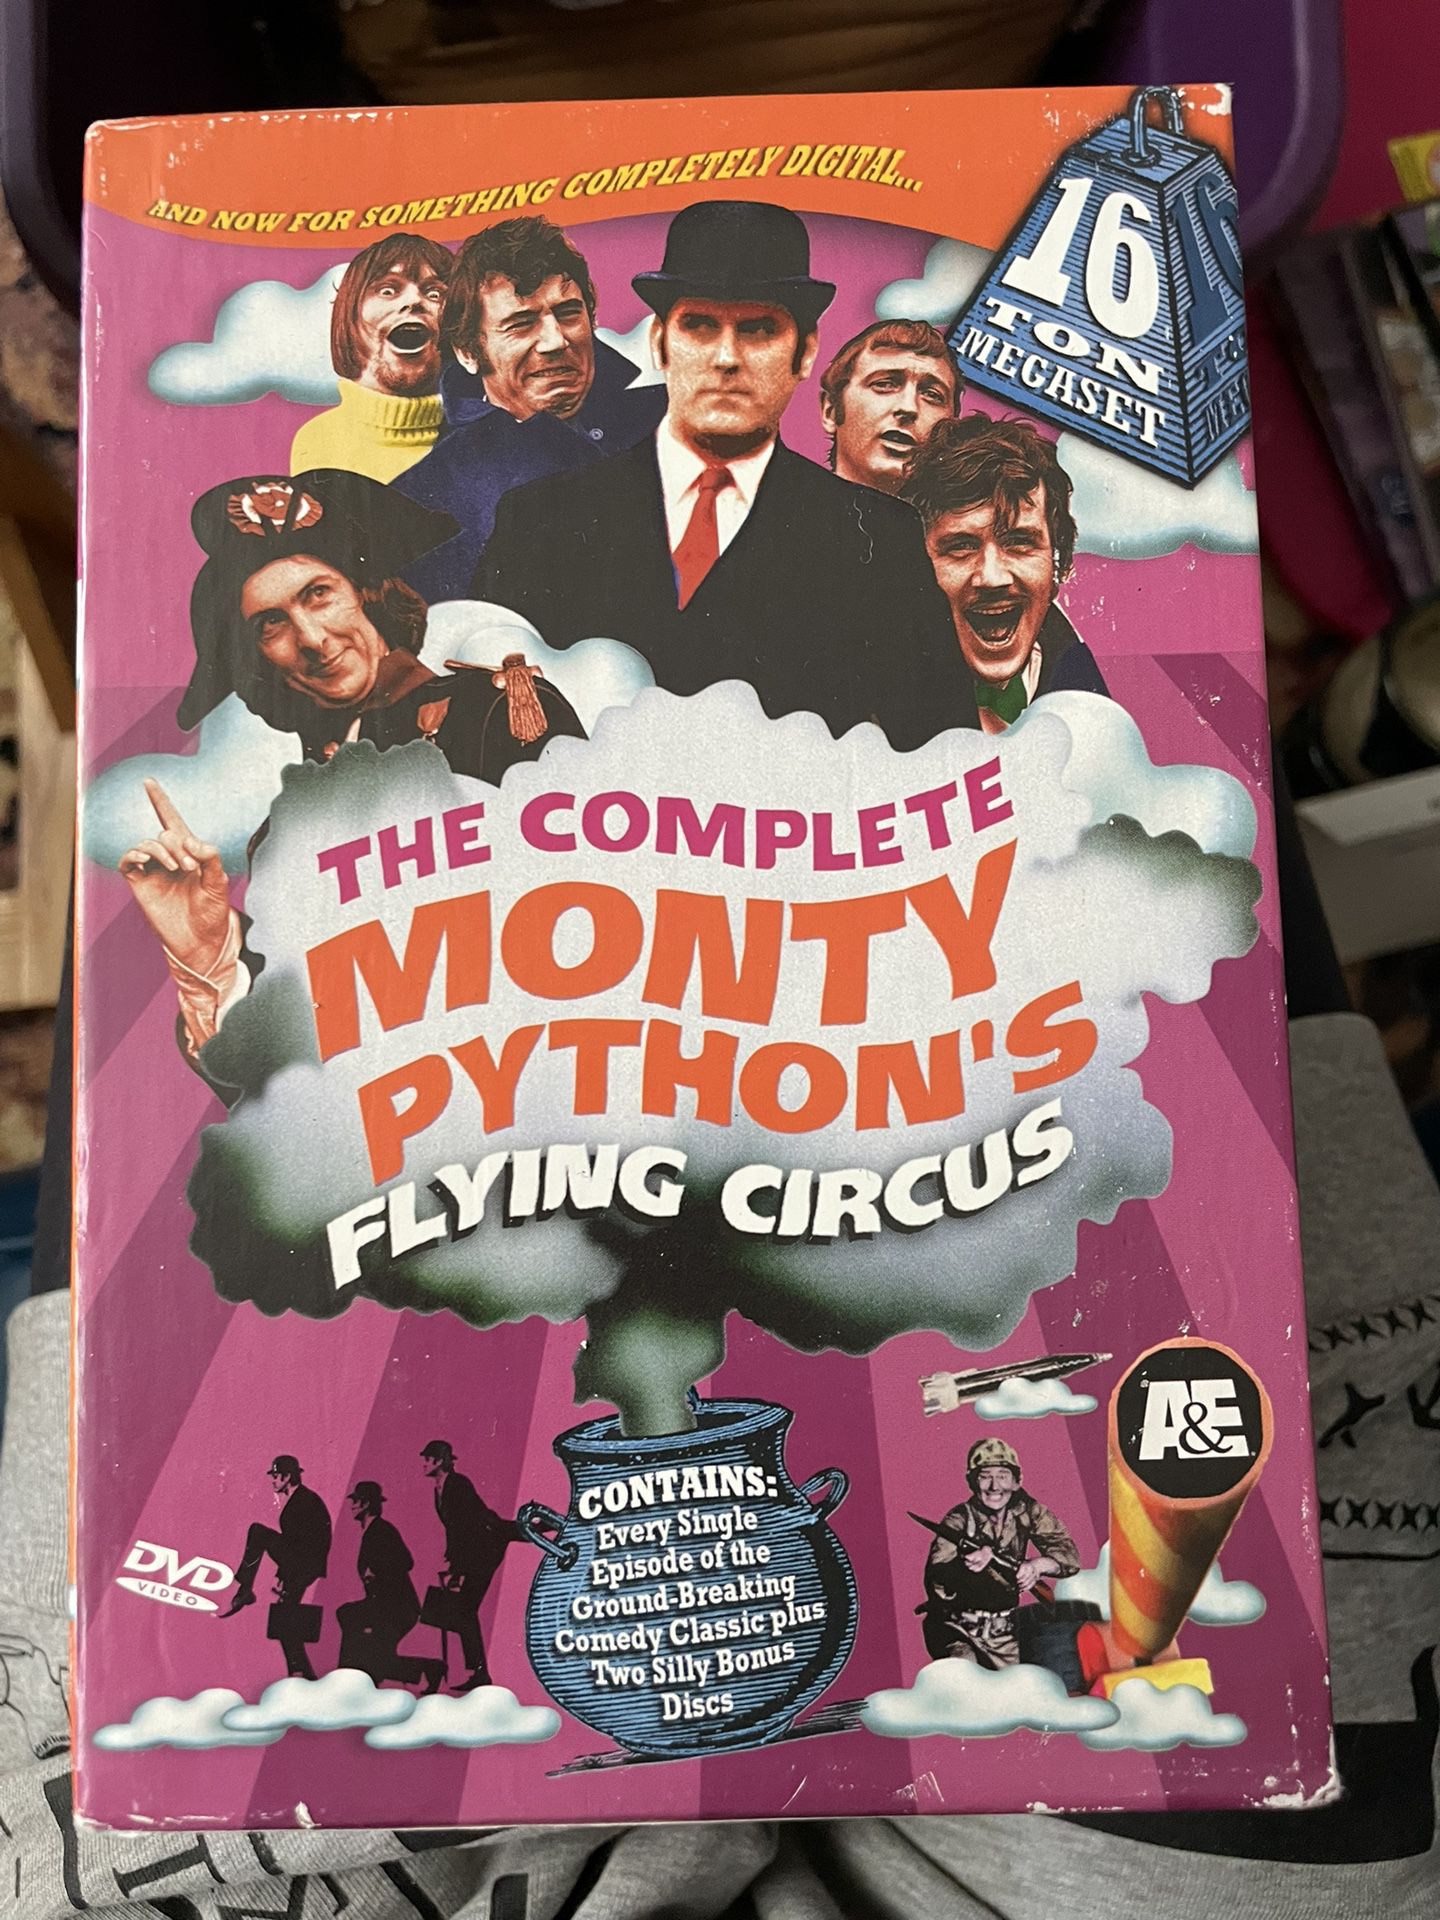 The Complete Monty Pythons Flying Circus (DVD Box set)